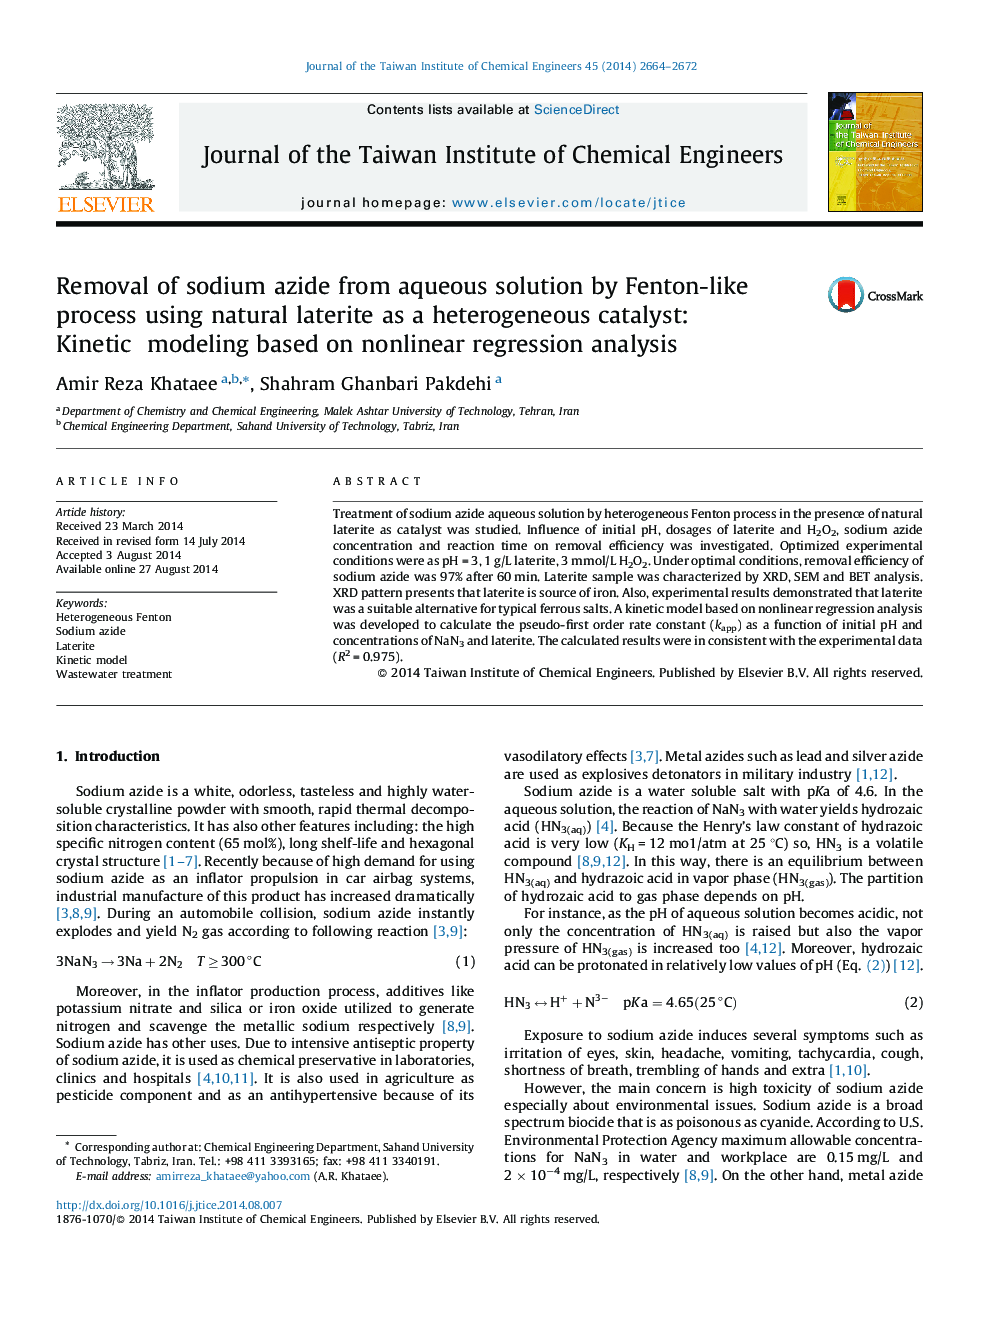 Removal of sodium azide from aqueous solution by Fenton-like process using natural laterite as a heterogeneous catalyst: Kinetic modeling based on nonlinear regression analysis